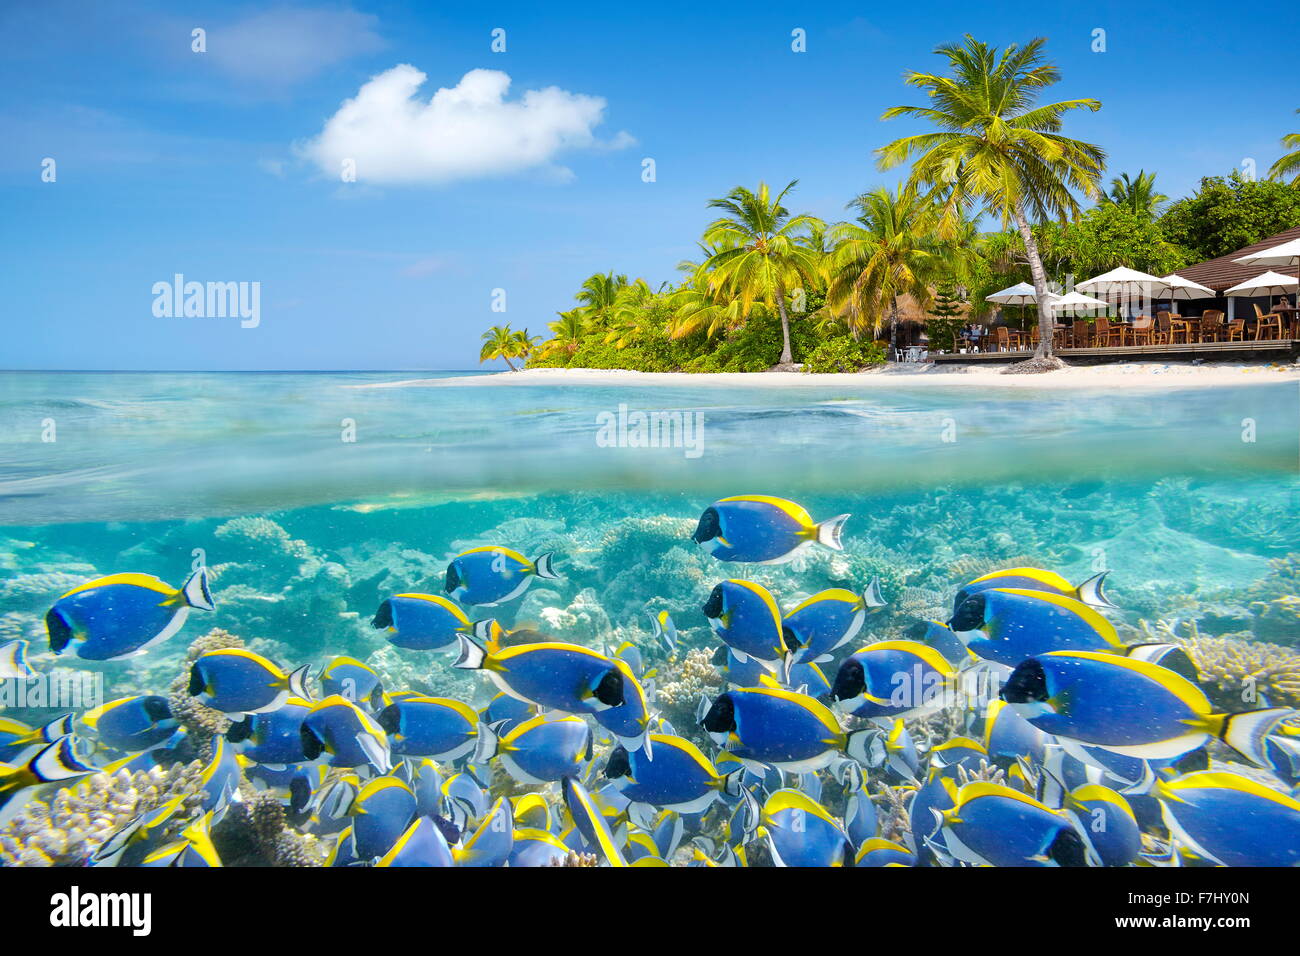 Maldives Island - underwater view with shoal of fish and reef Stock Photo